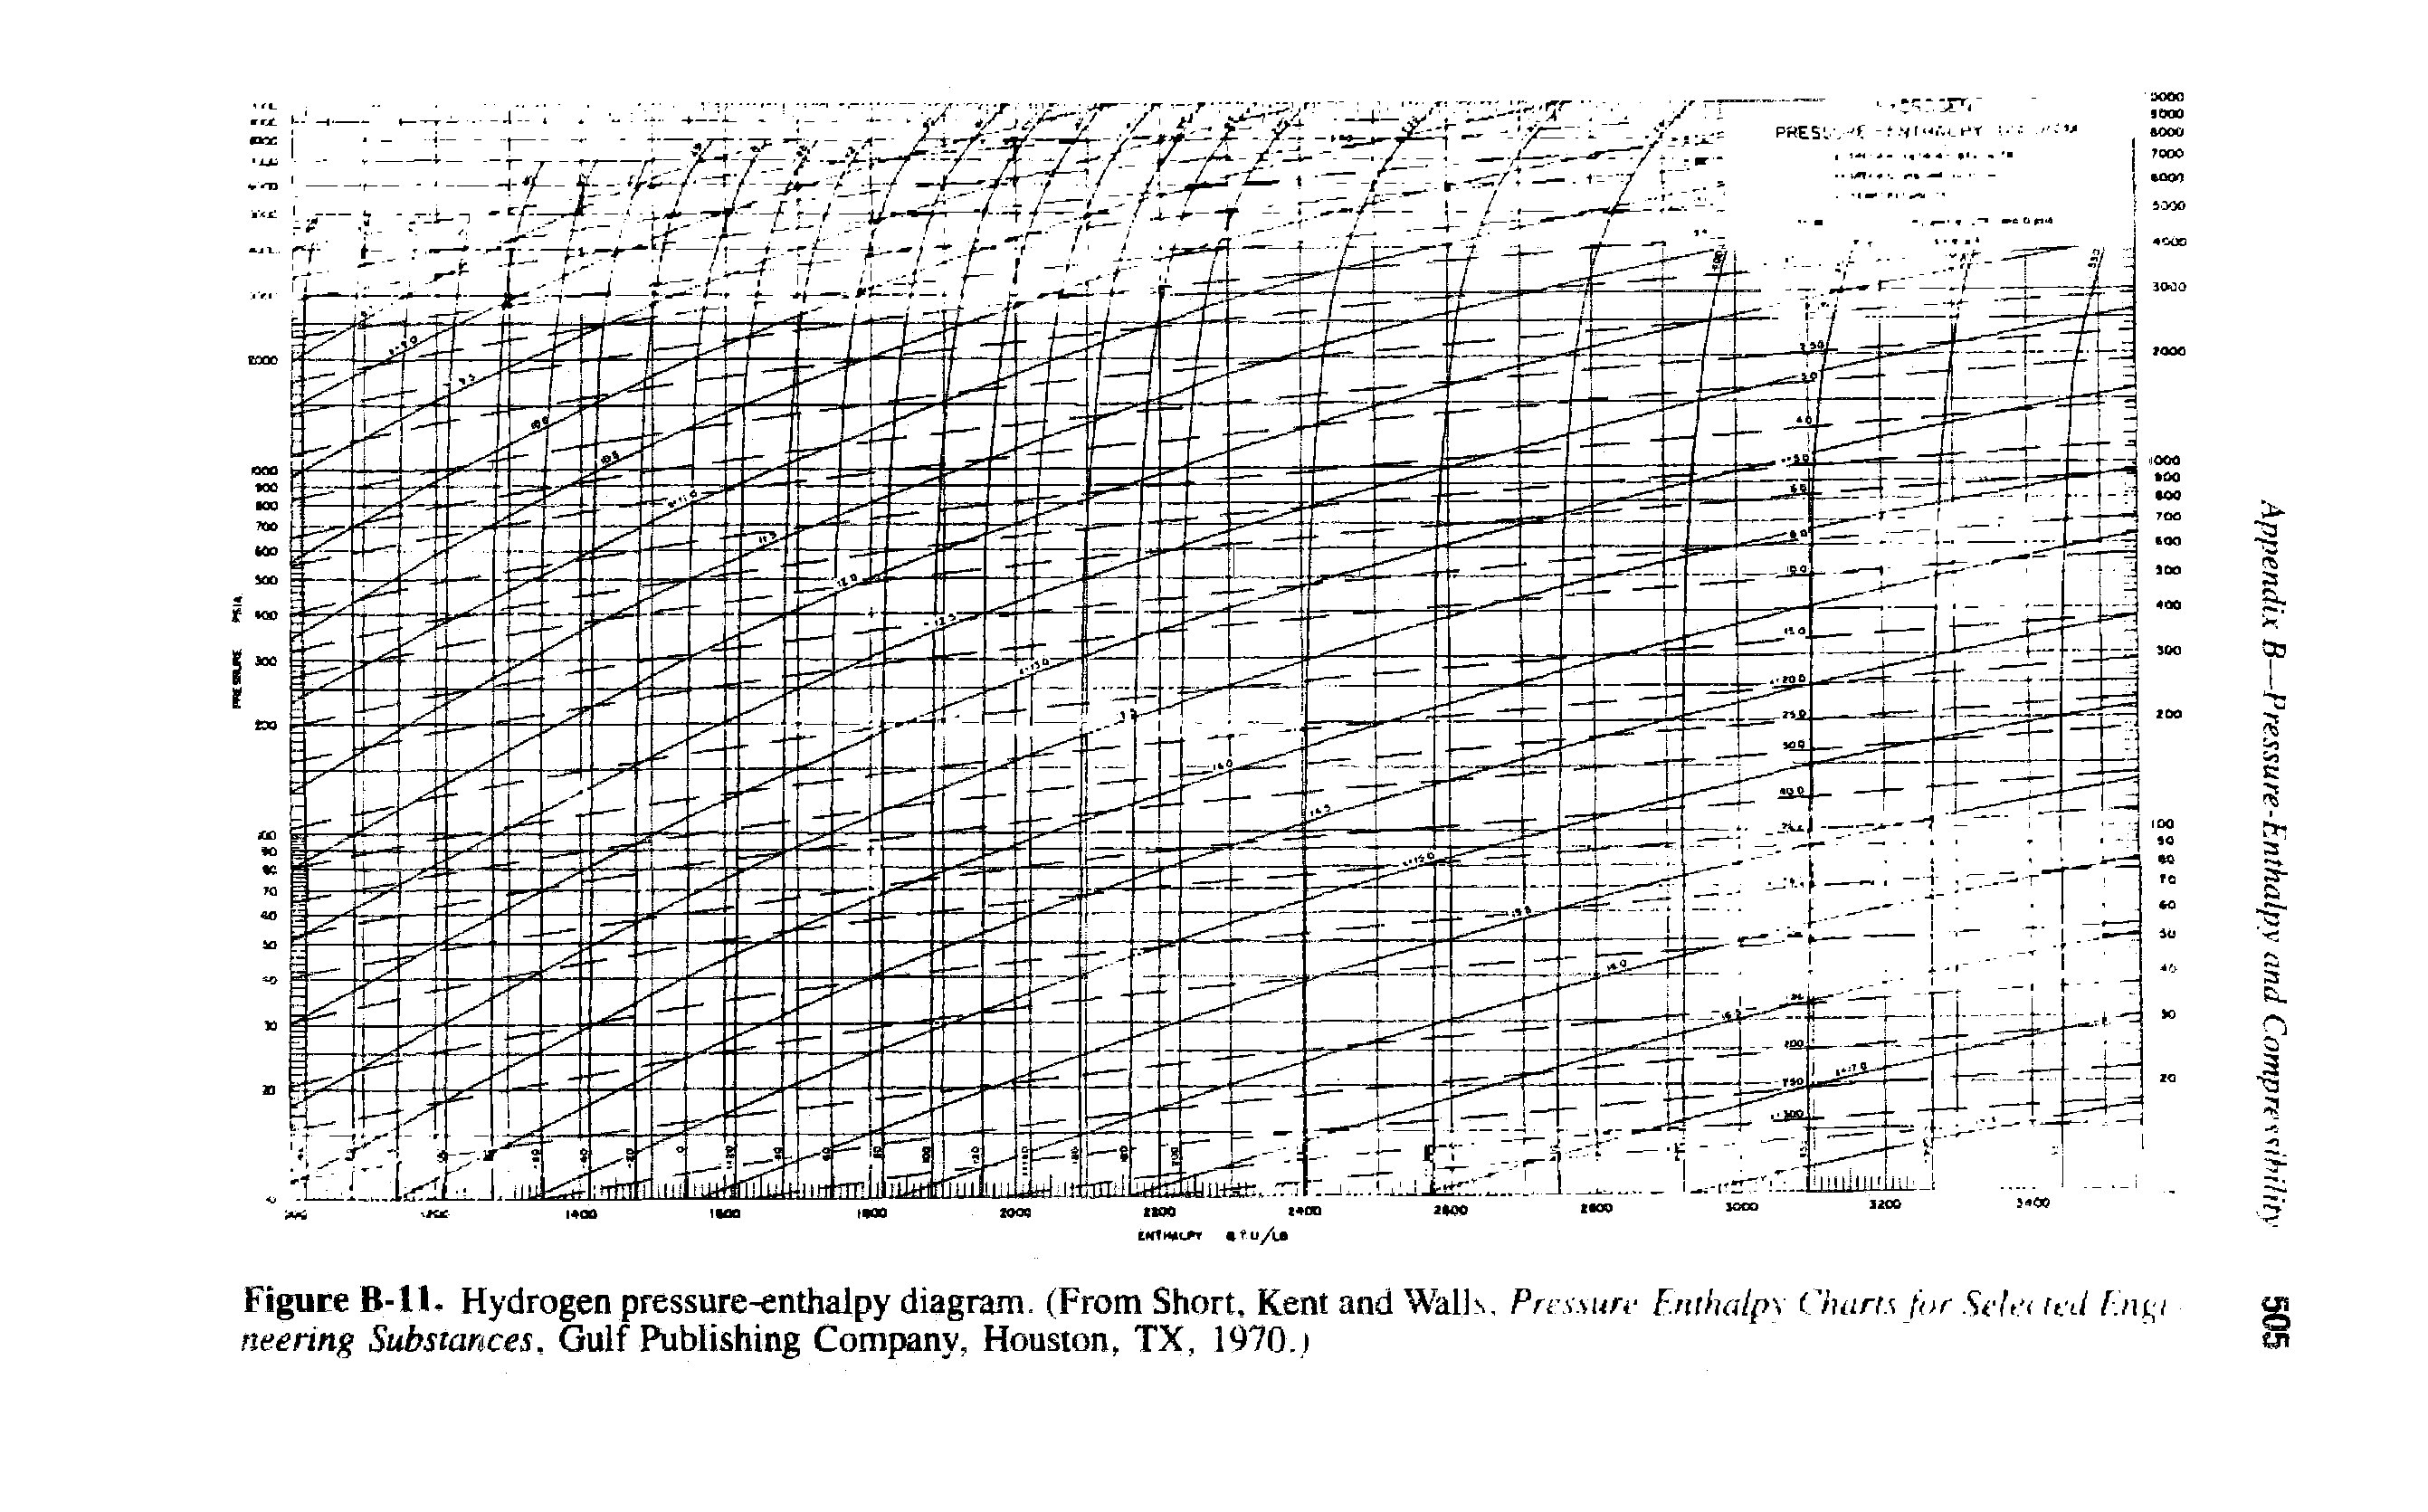 Figure B-H. Hydrogen pressure-enthalpy diagram. (From Short, Kent and Walls, Pn-ssurc F.nthalpx Chan. for wd F.ni i nee ring Substances, Gulf Publishing Company, Houston, TX, 1970.)...